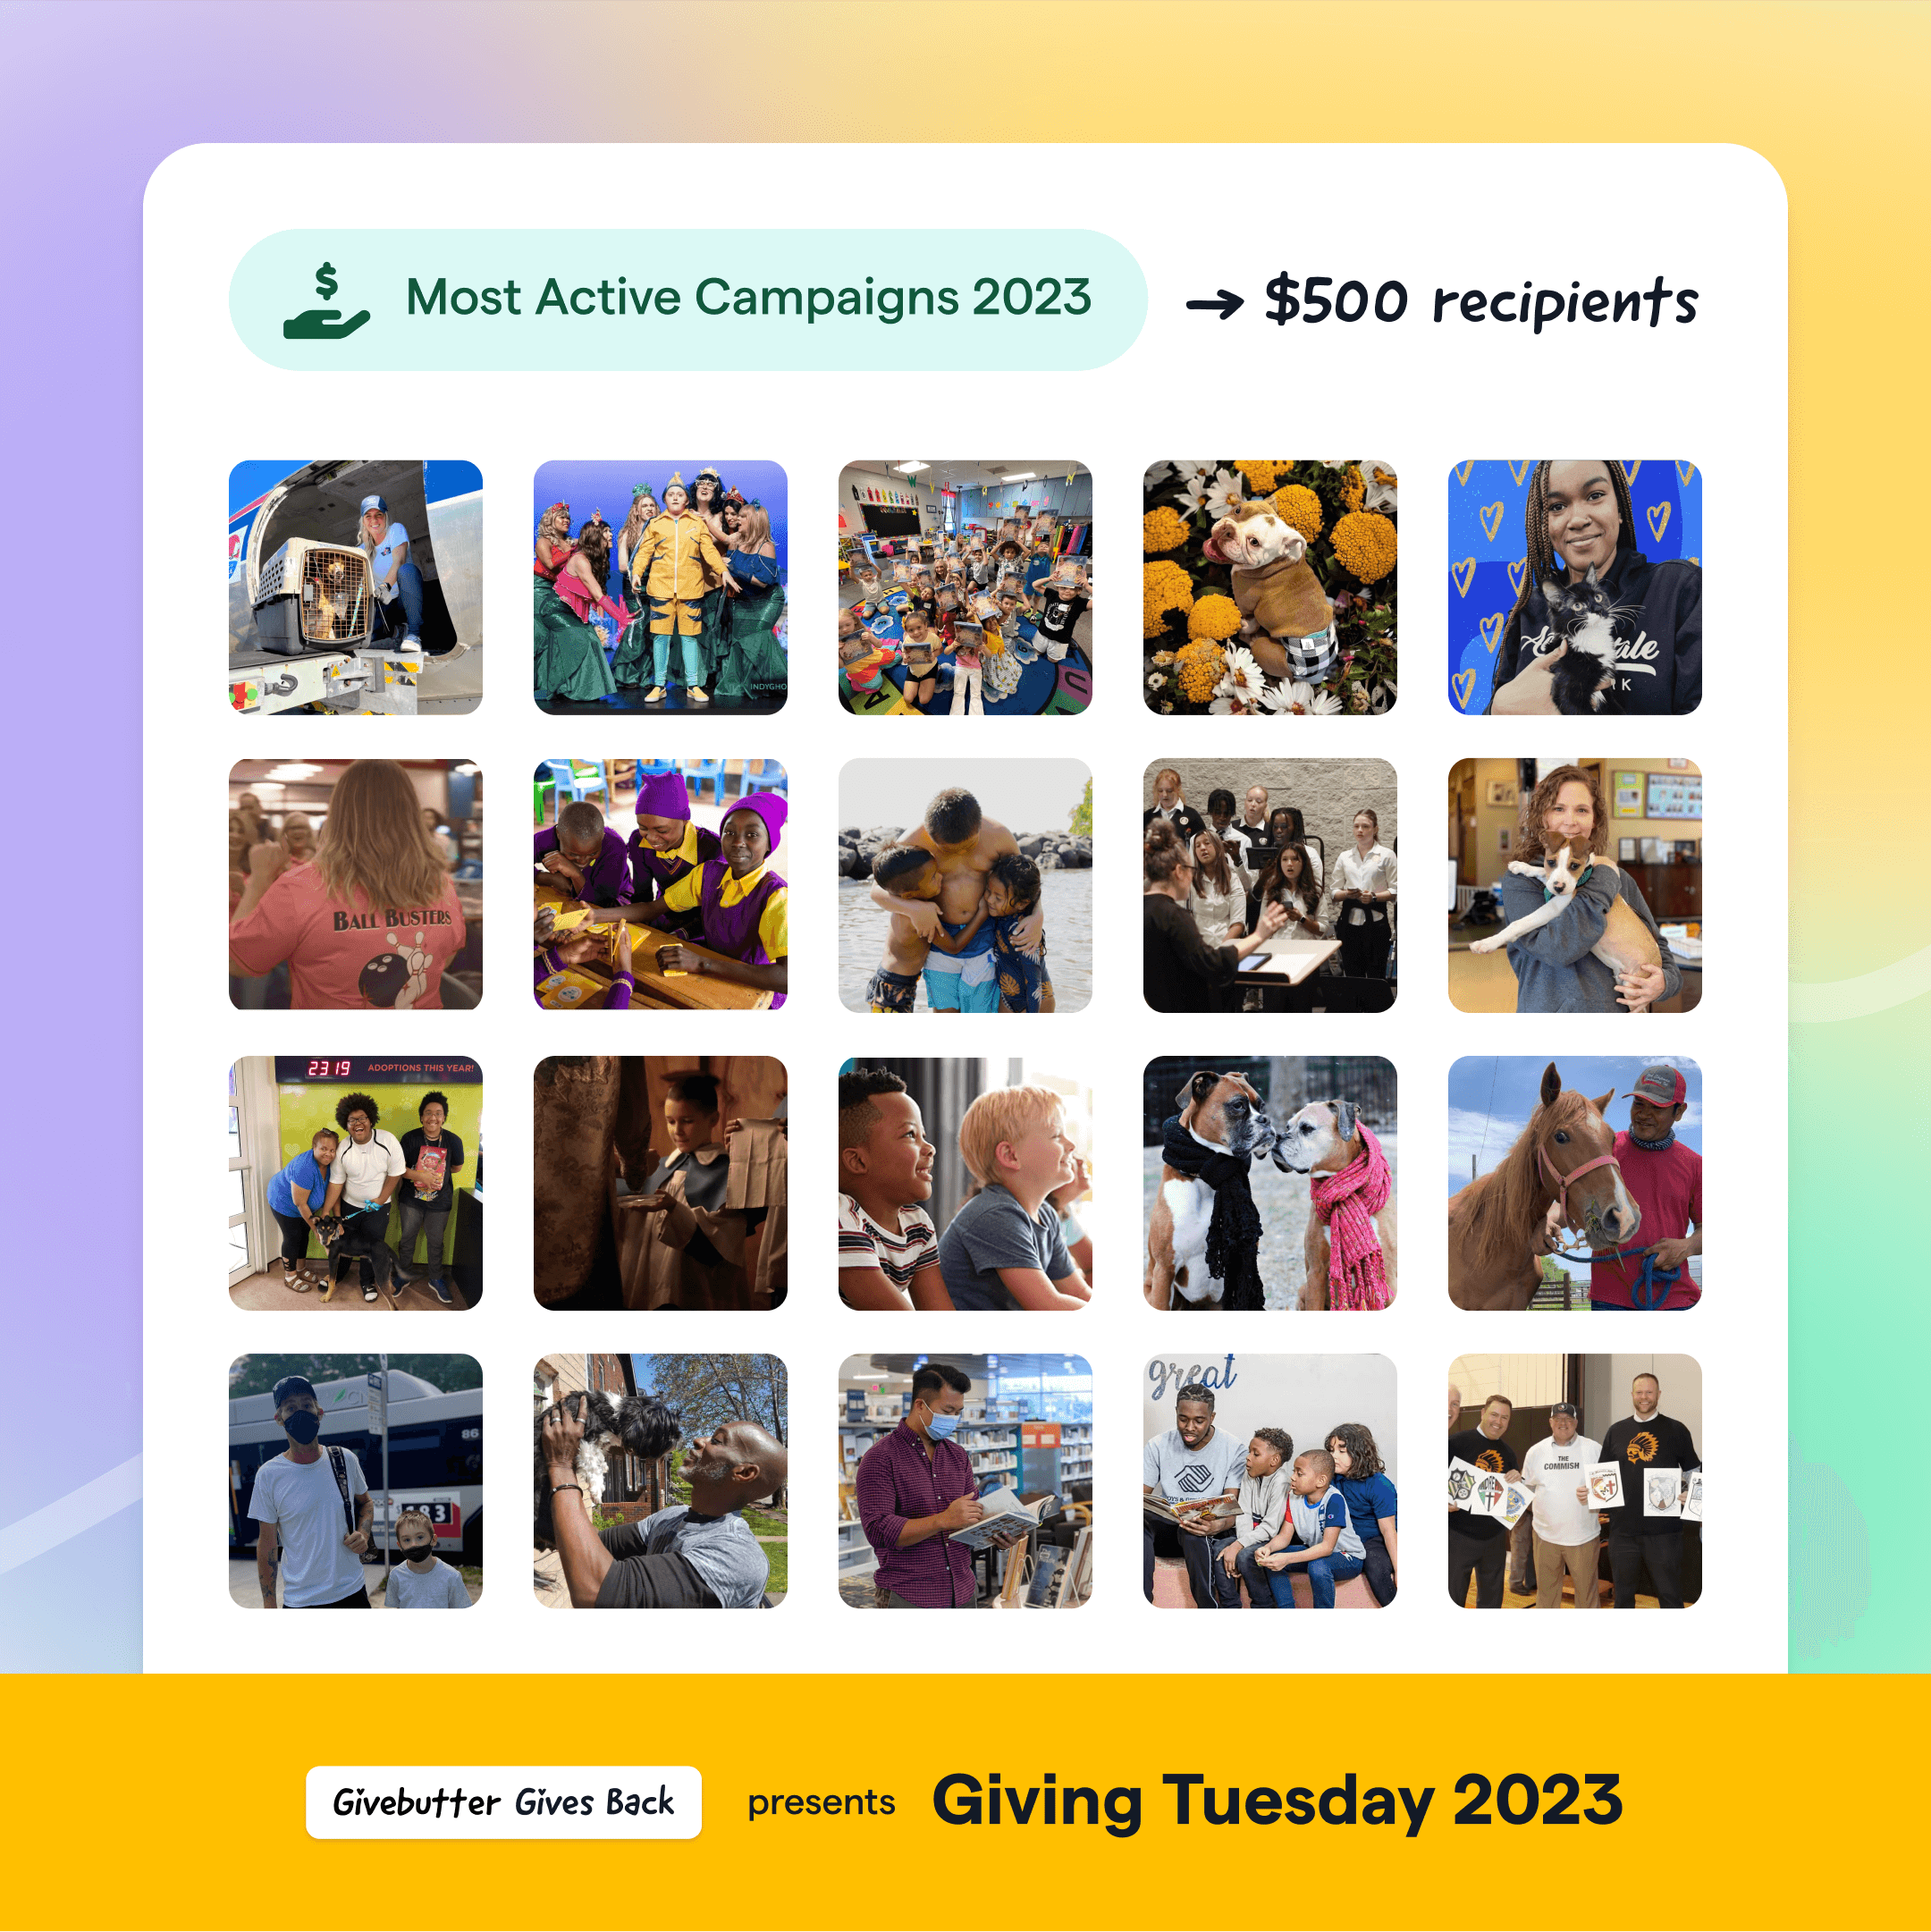 Graphic showing the 20 most active campaigns on Givebutter on Giving Tuesday